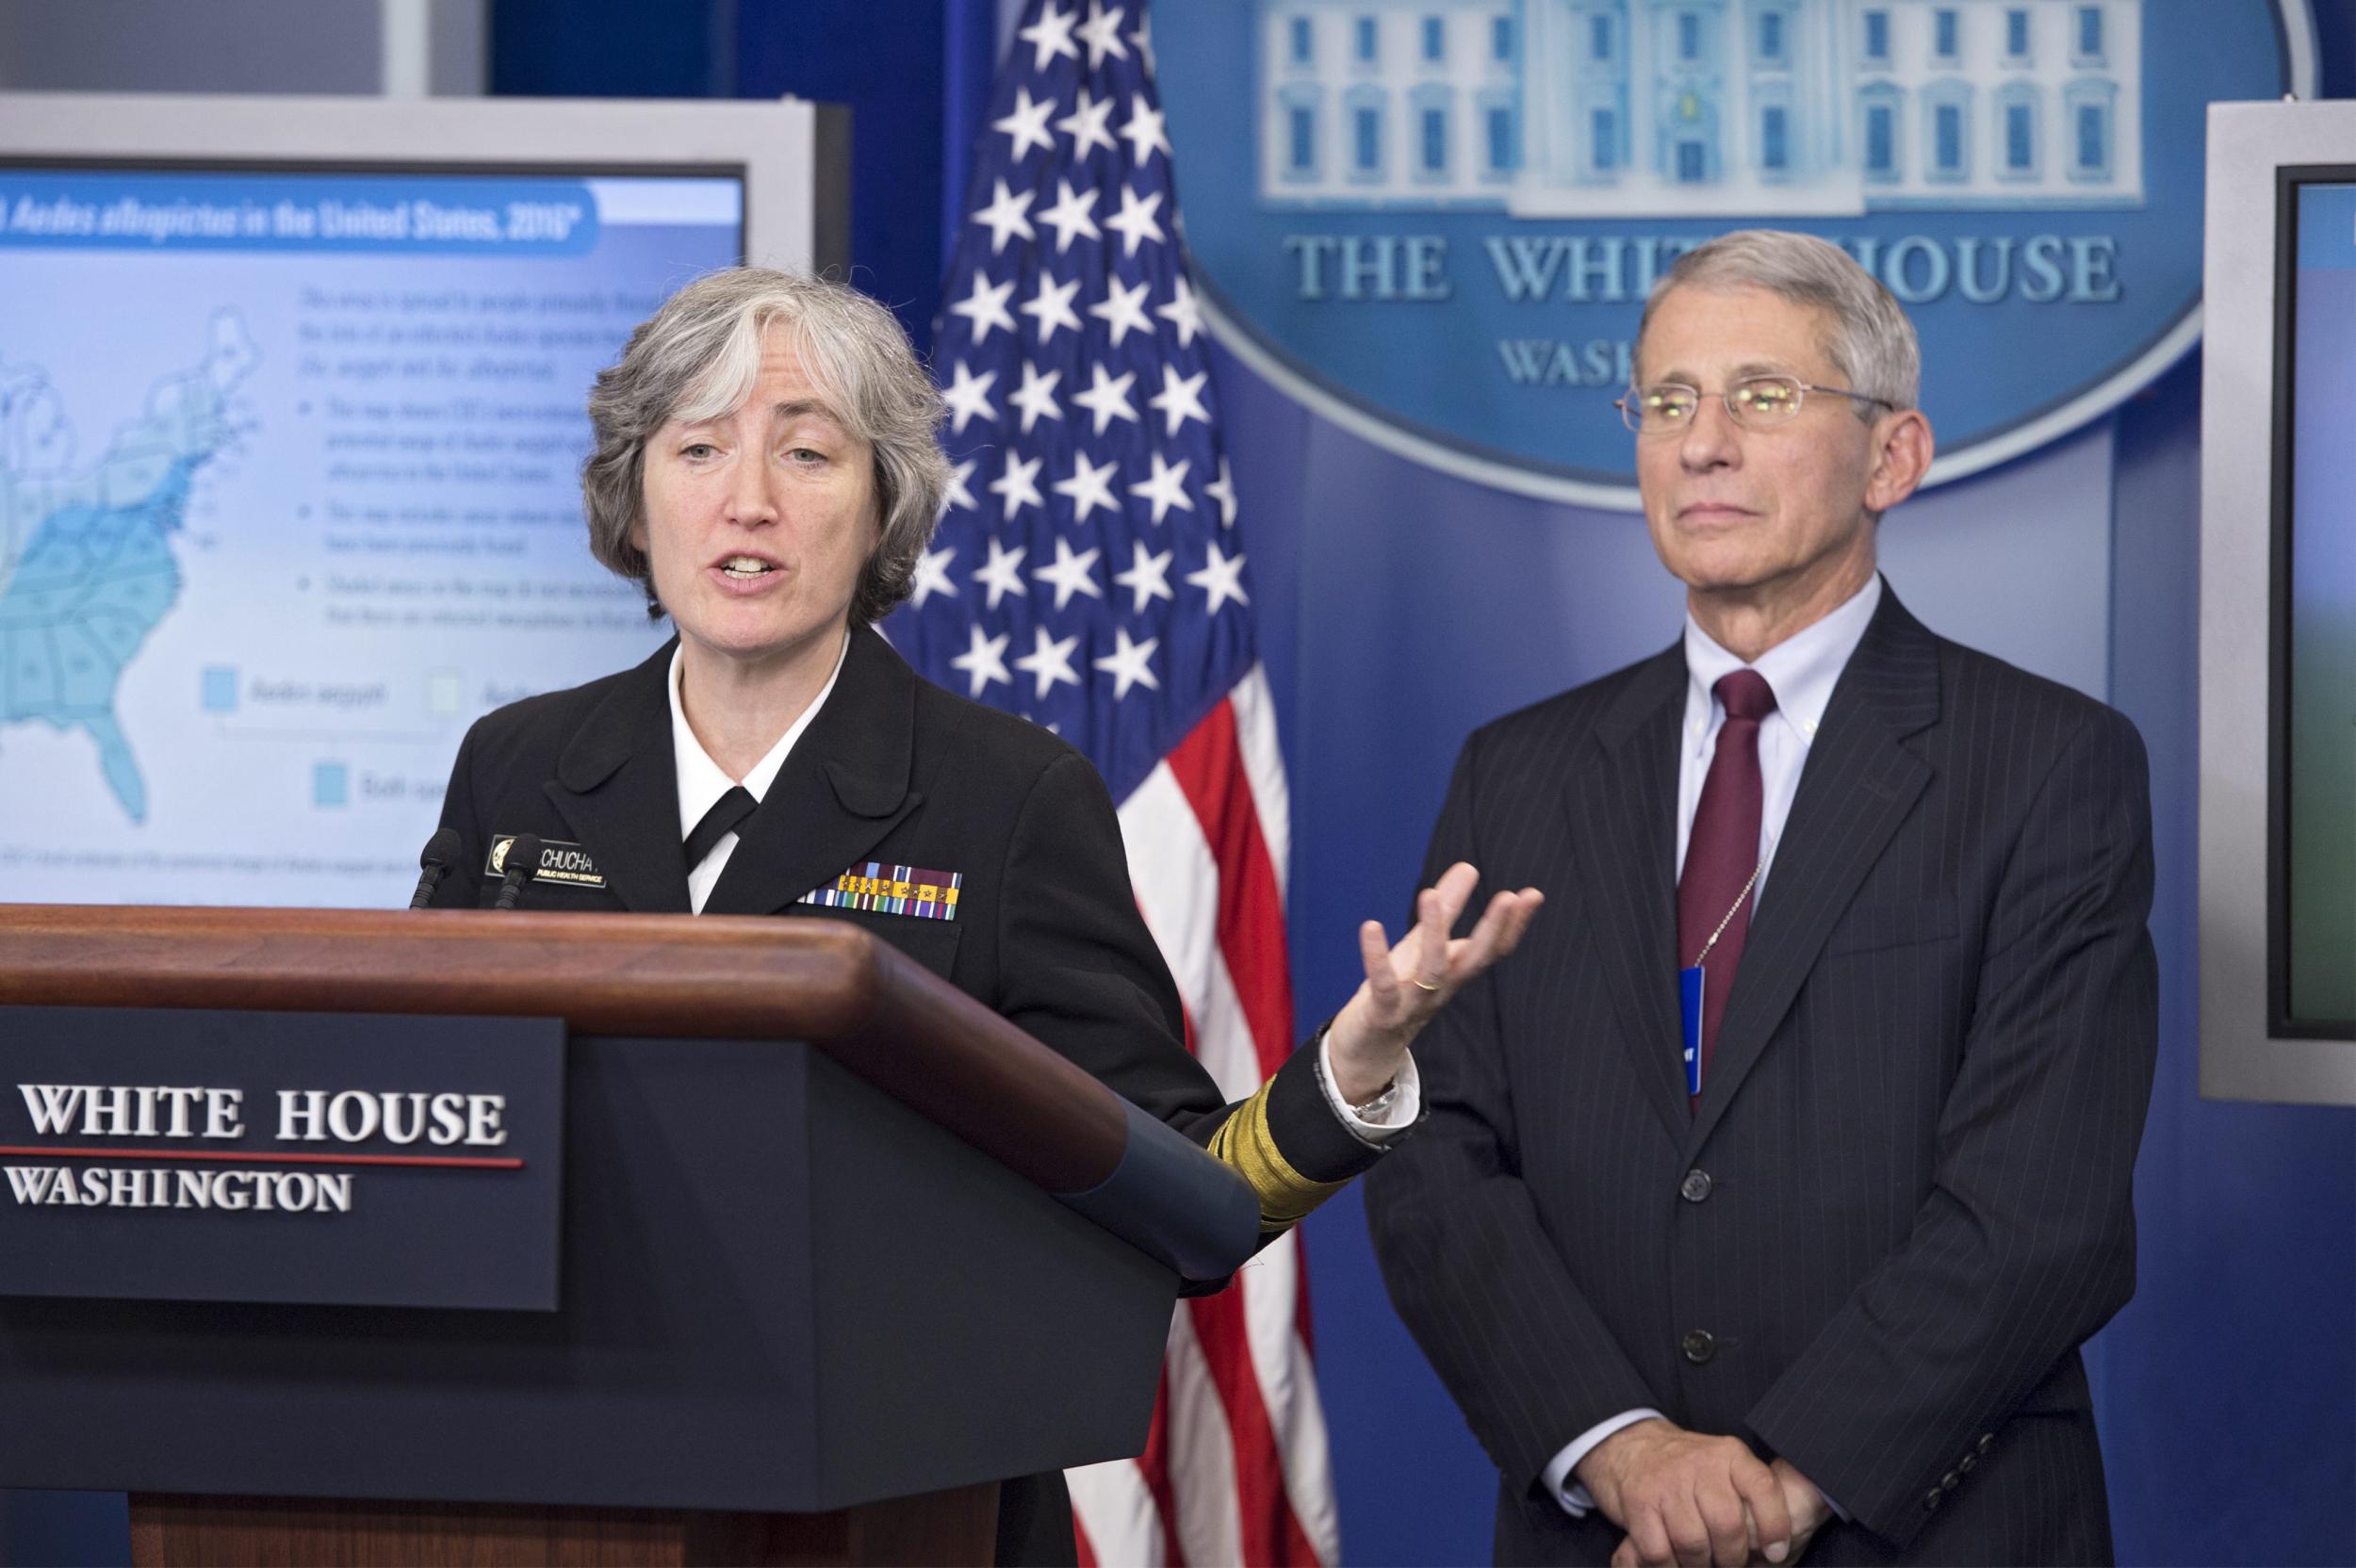 Director of the National Institute of Allergy and Infectious Diseases Anthony Fauci (R) and Dr. Anne Schuchat (L), Principal Deputy Director of the Centers for Disease Control and Prevention (CDC), speaking at the White House